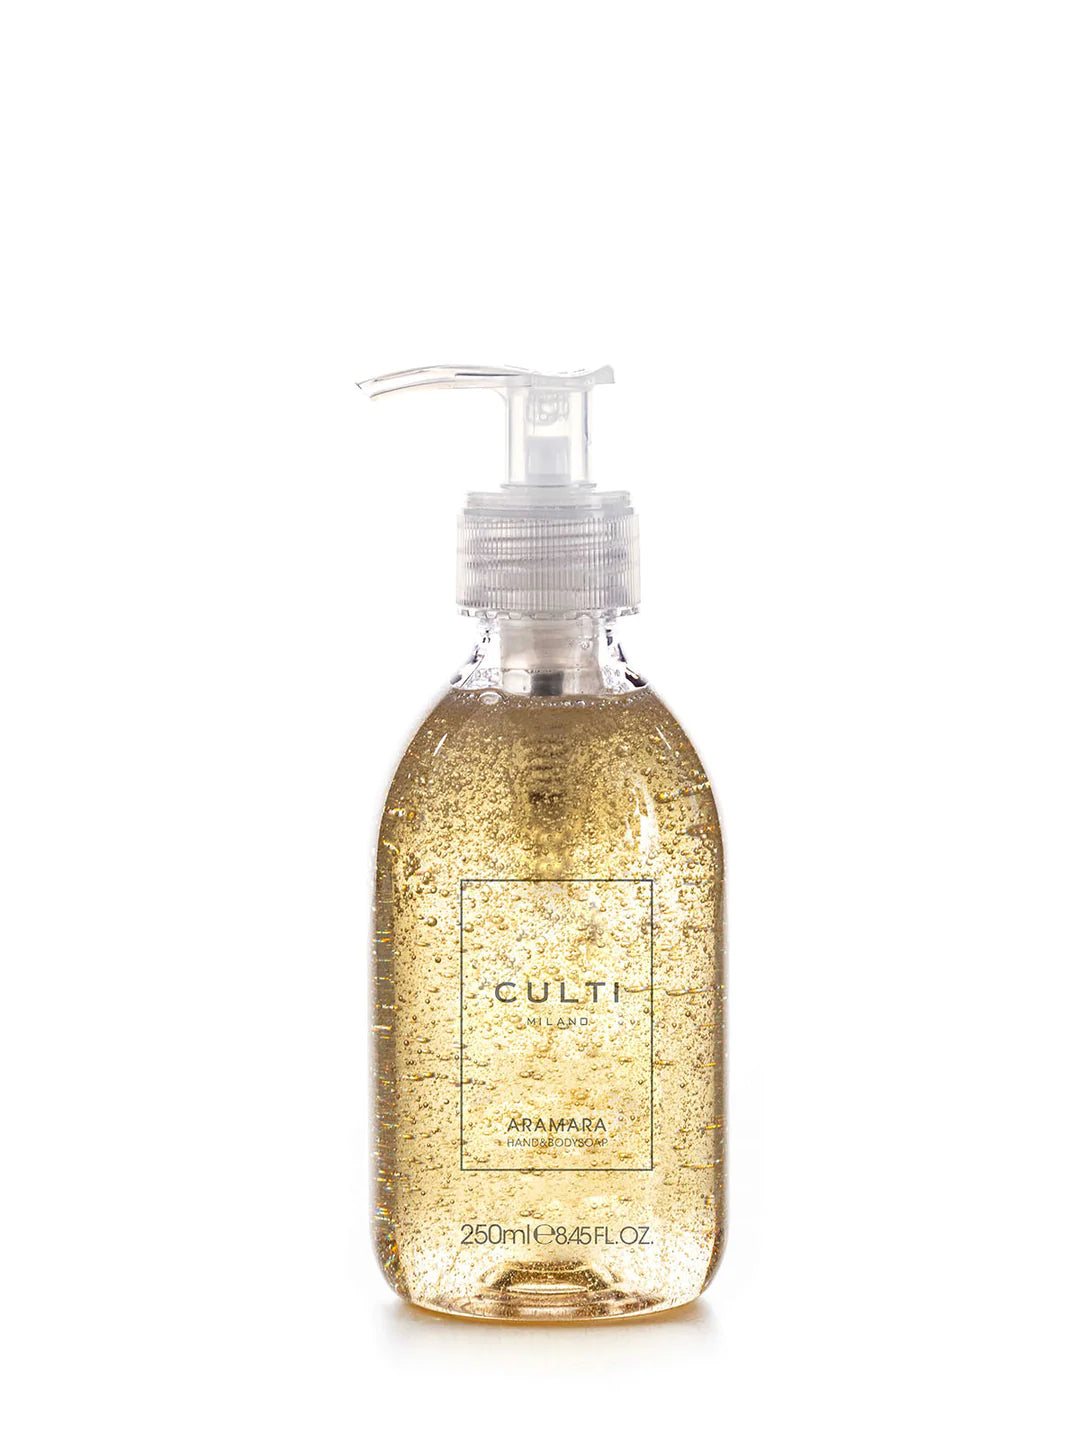 CULTI MILANO WELCOME COLLECTION 250 ml - SOAP  $40.00